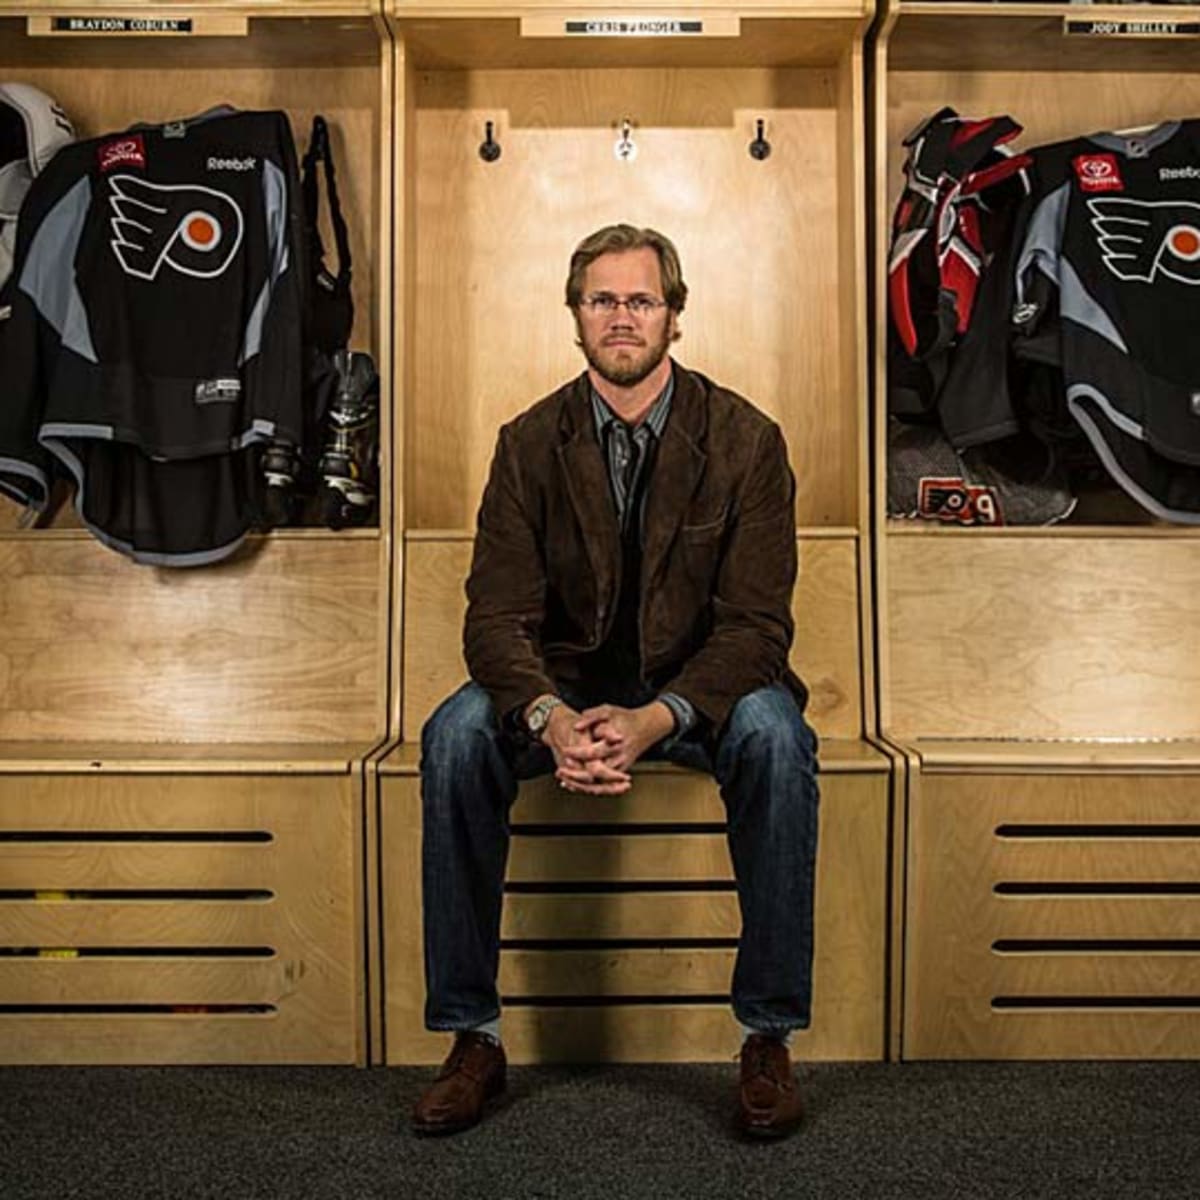 Chris Pronger injury: Flyers star 'is never going to play again,' team  confirms 